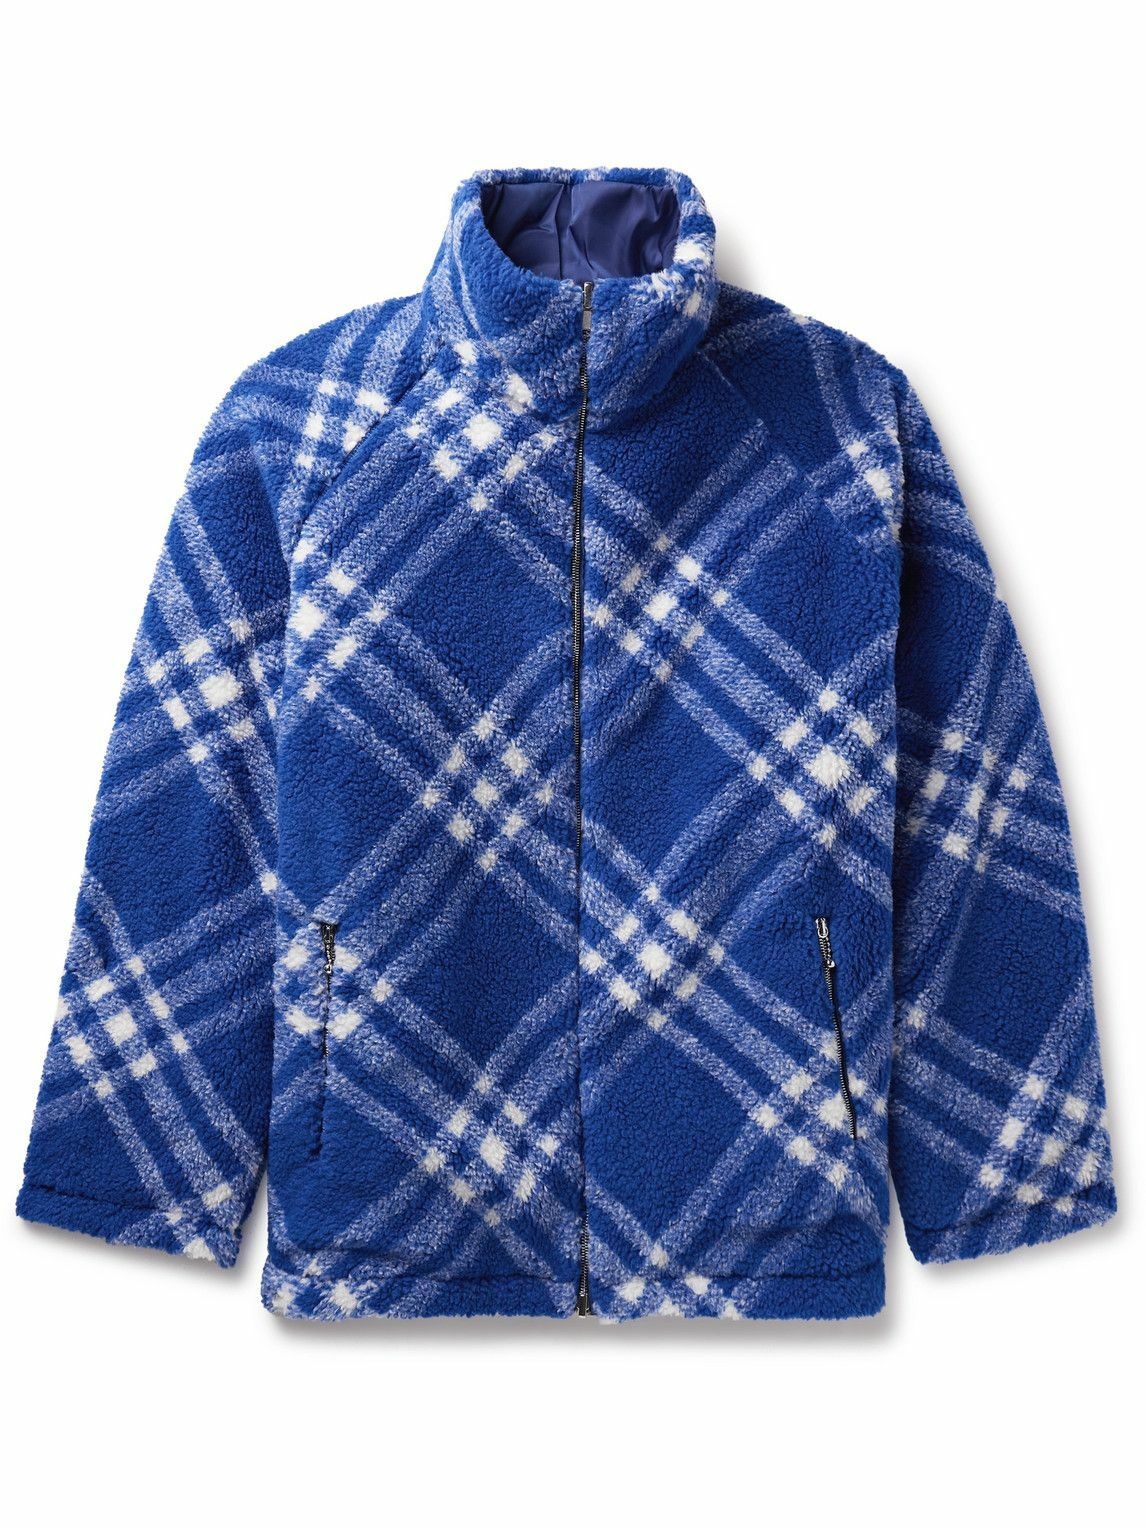 Burberry - Reversible Checked Fleece and Shell Jacket - Blue Burberry